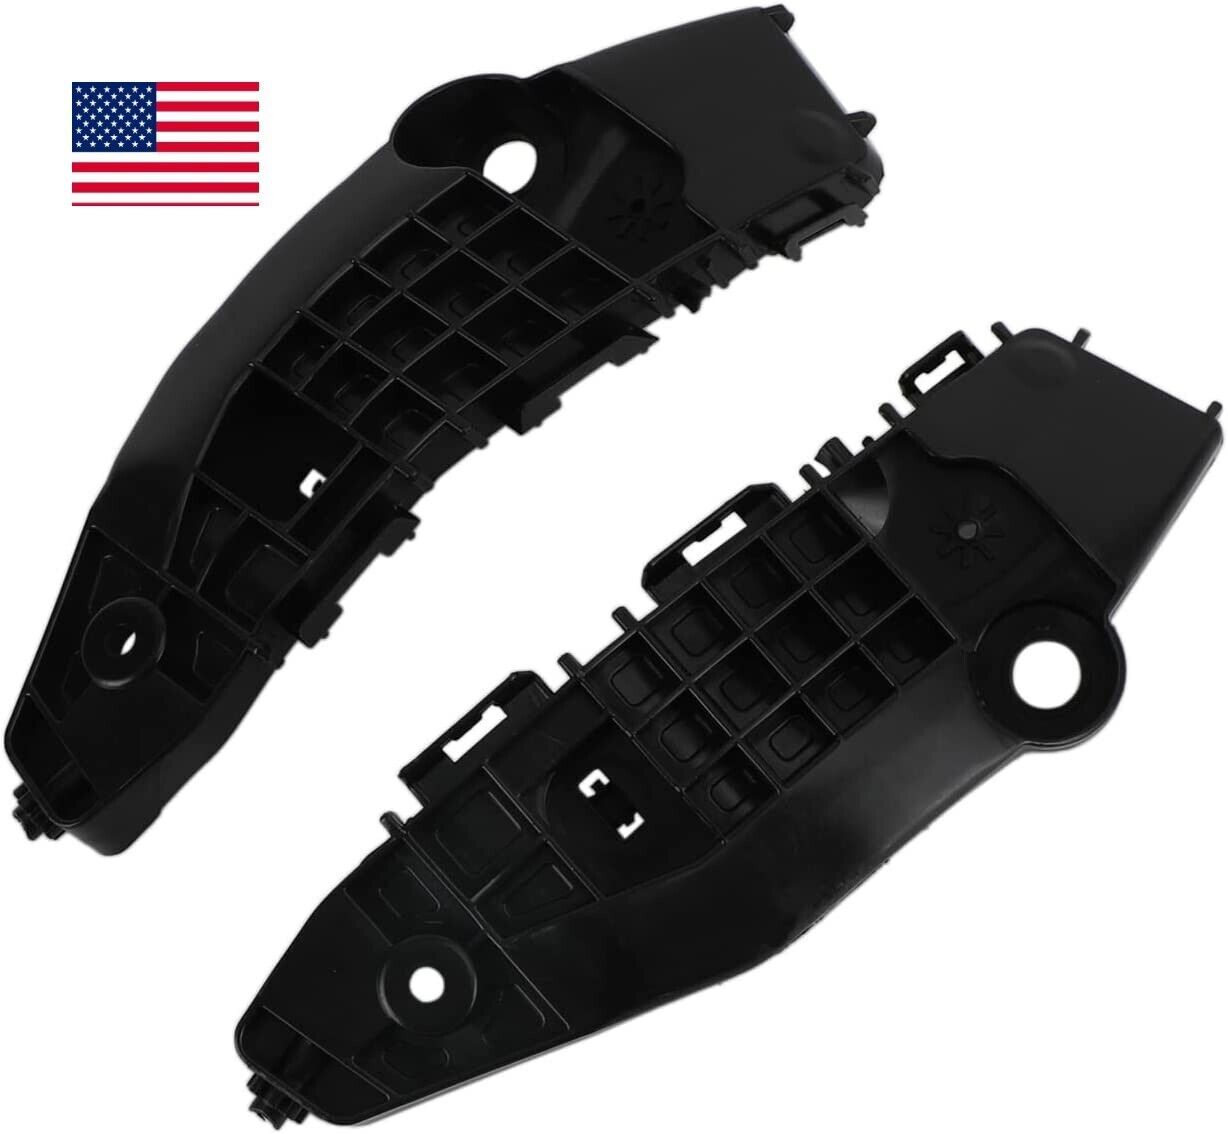 Pair of Front Bumper Support Spacer Retainer Brackets for Toyota Rav4 2019-2021 - $13.50